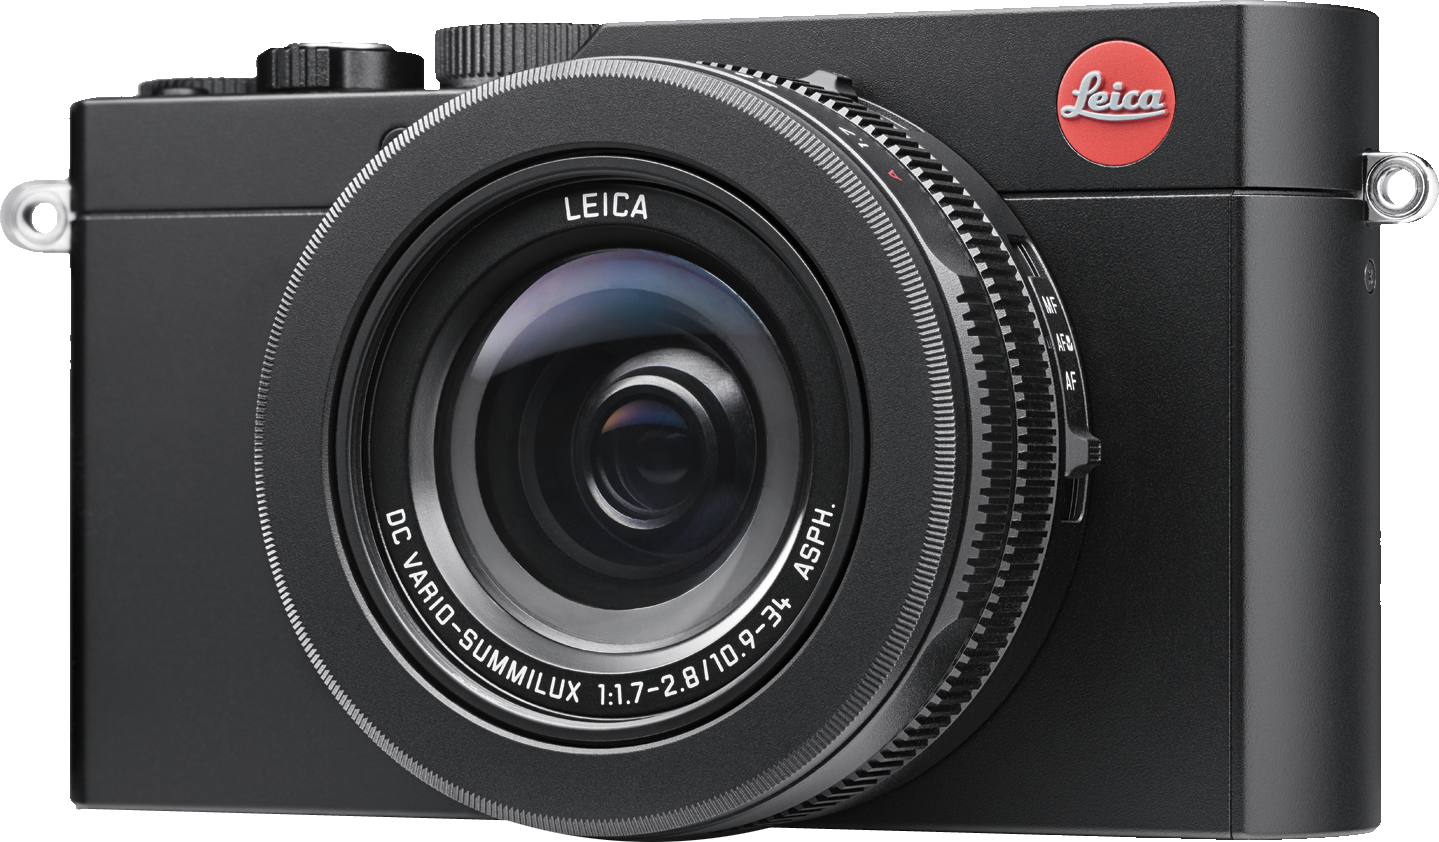 A Leica D-Lux camera. This is an example of Ray's new toy!